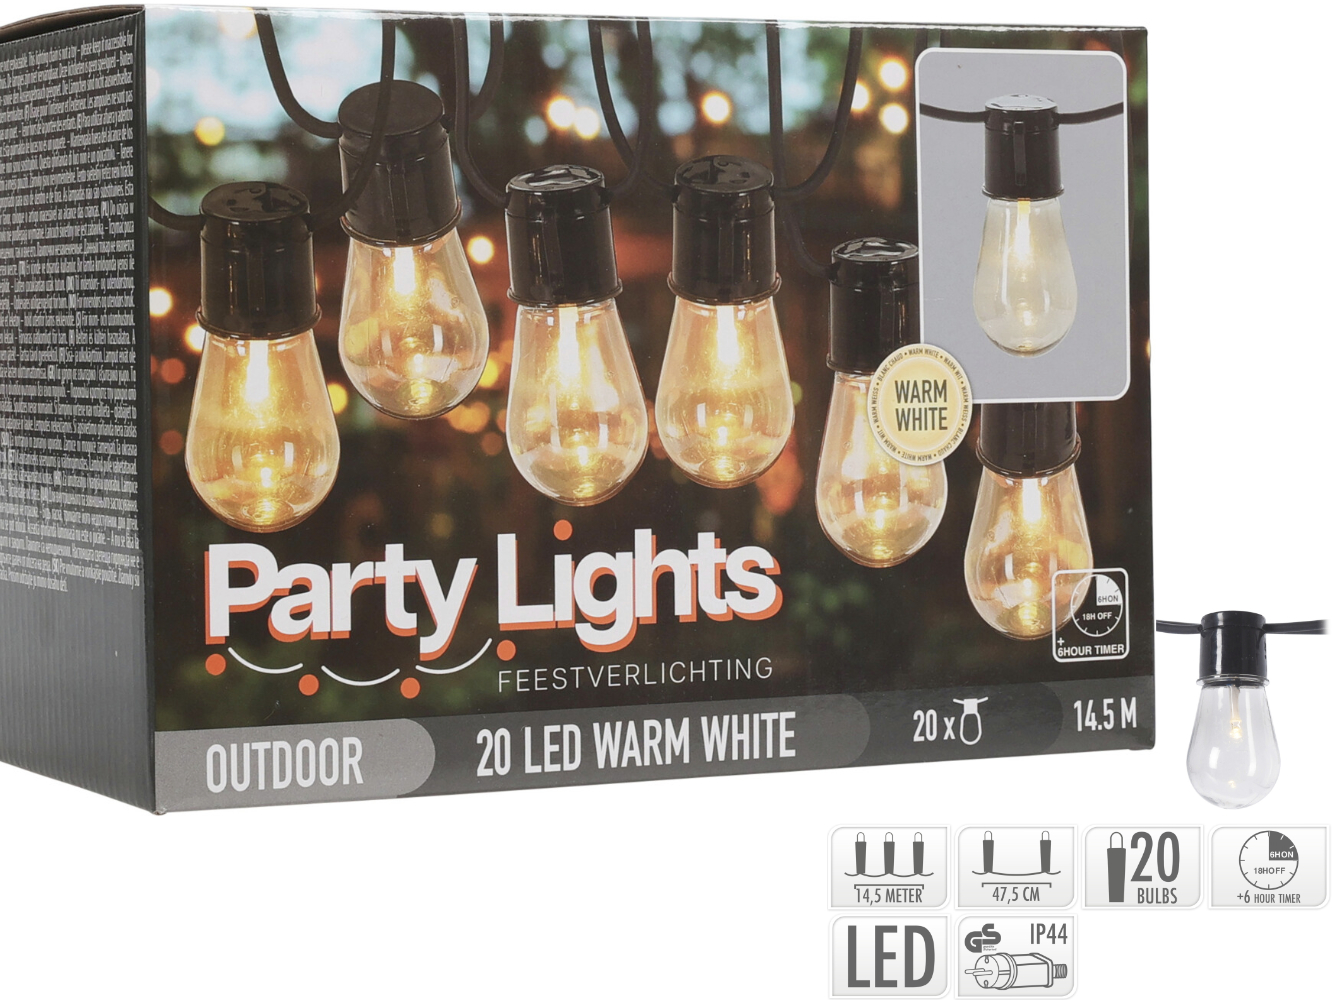 Partybeleuchtung Outdoor mit 20 LED Lampen Festbeleuchtung, 14,5 m, mit TIMER